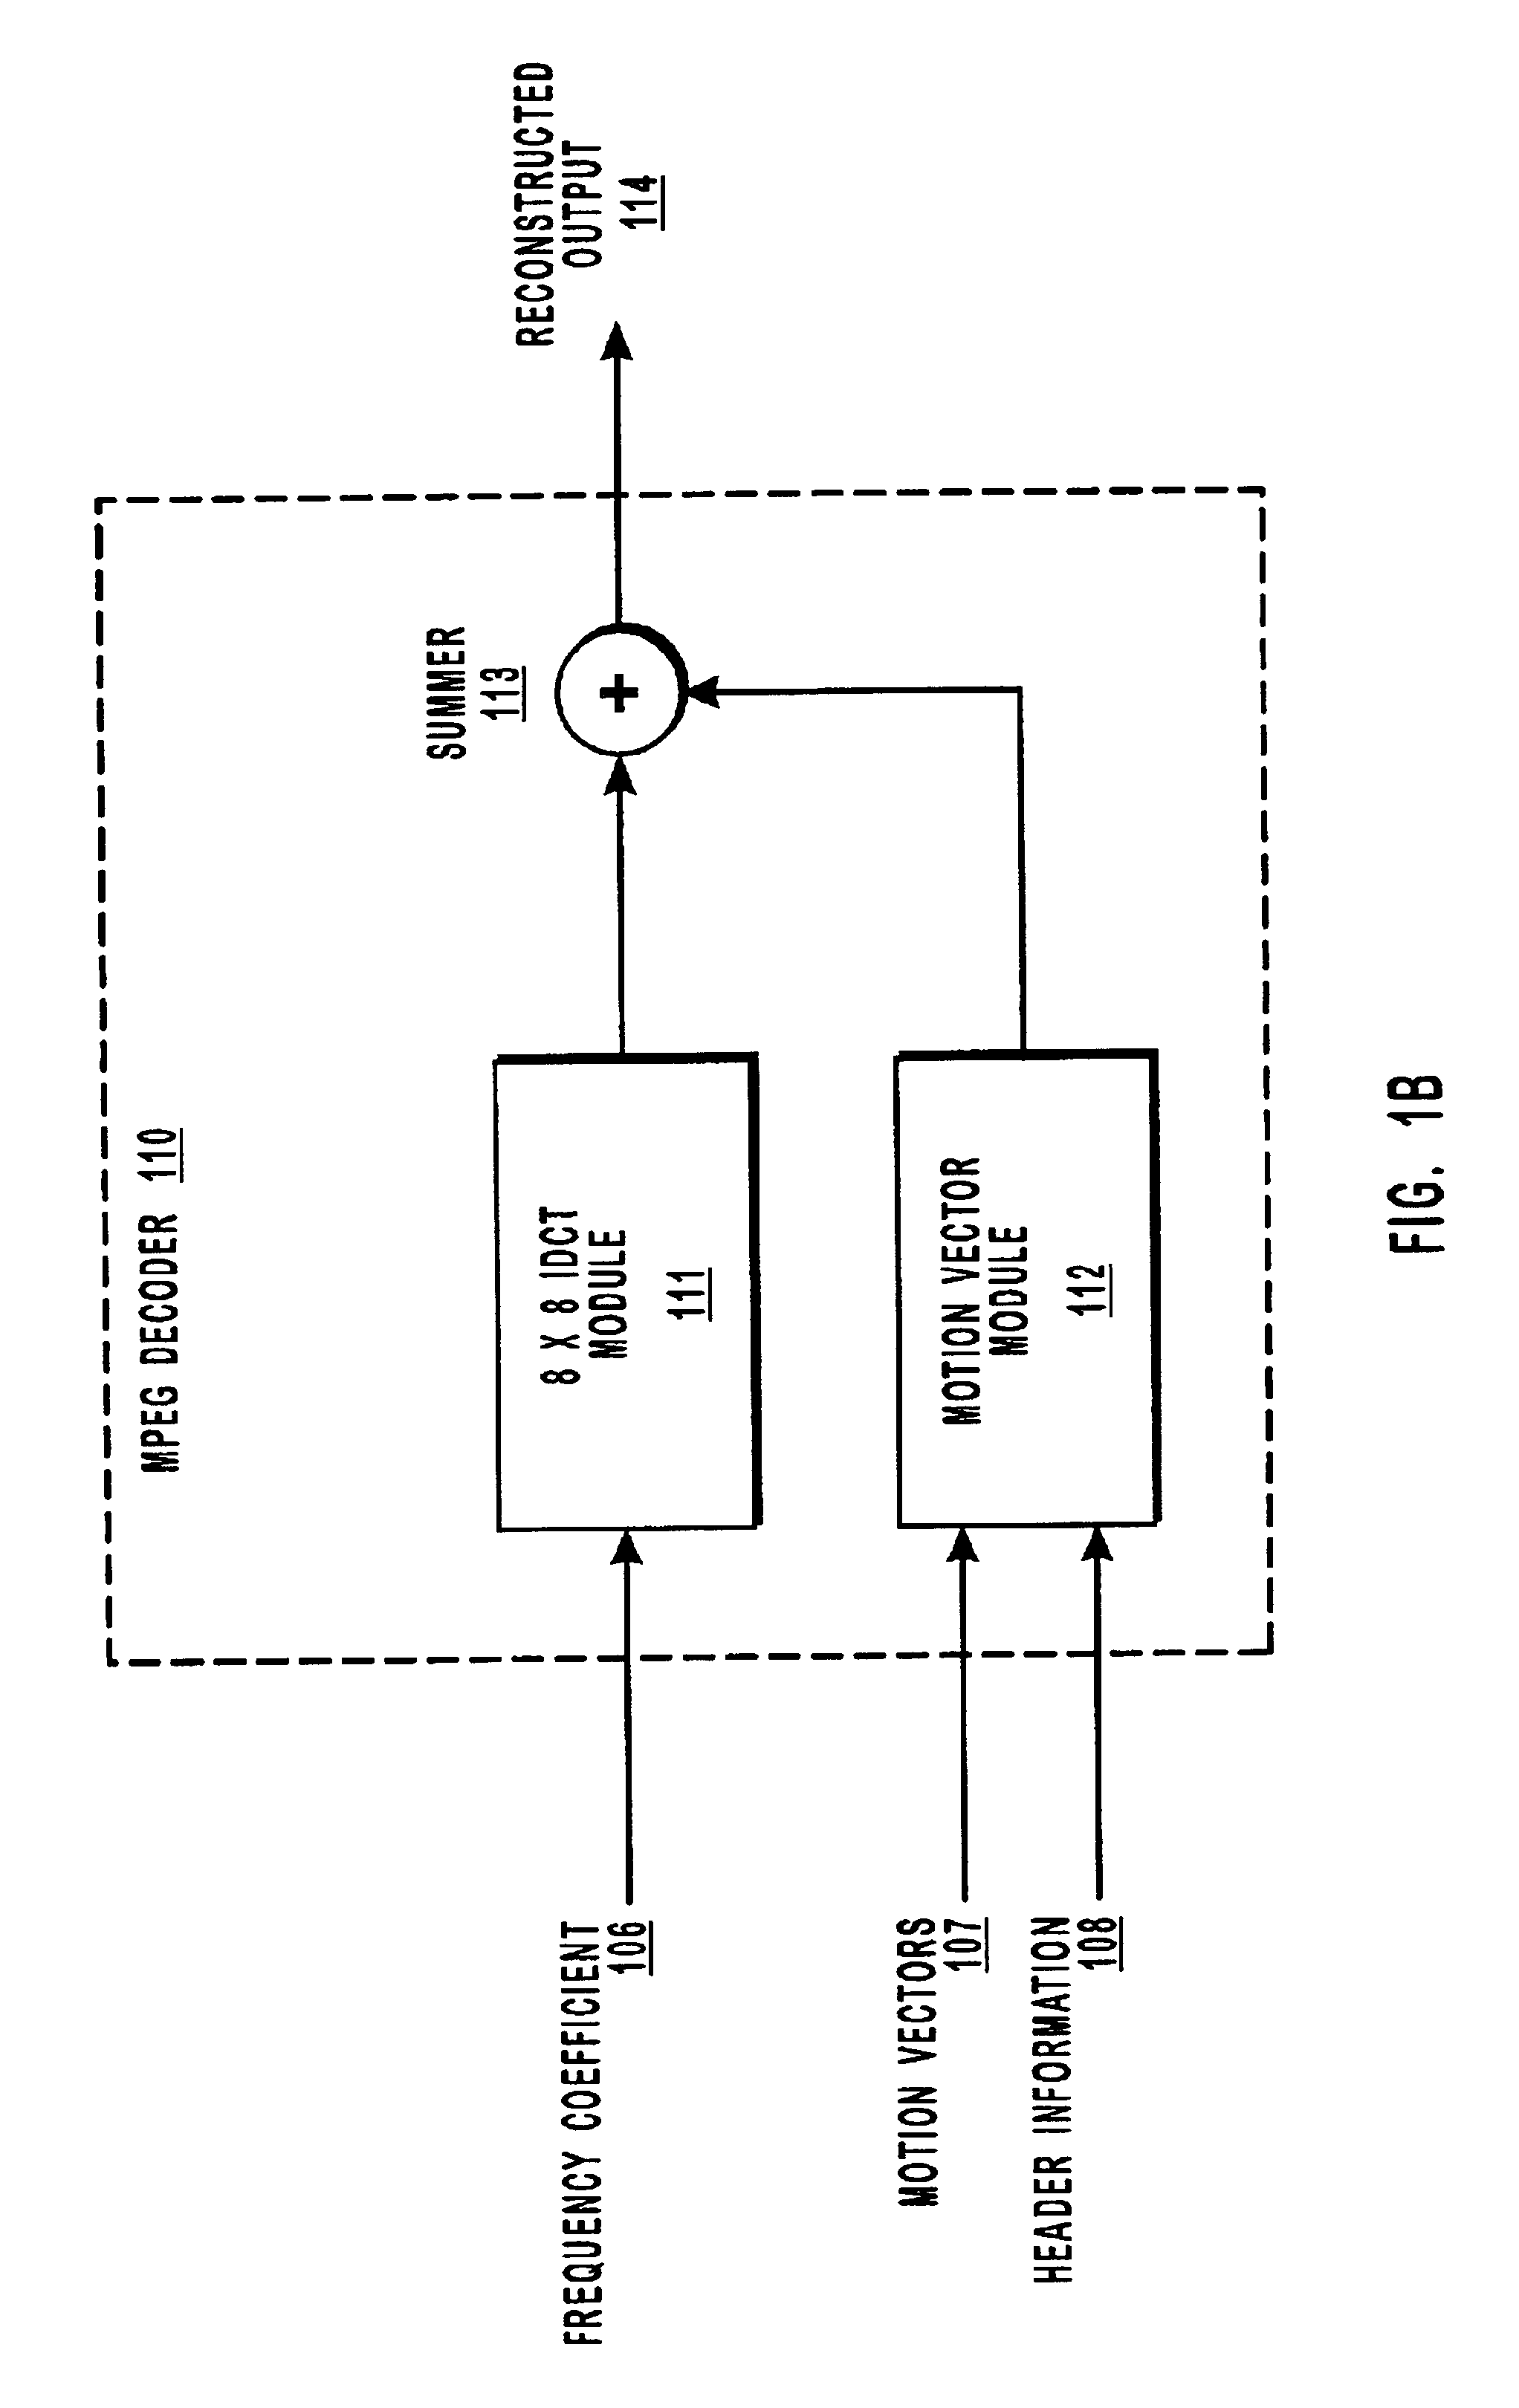 Systems and methods for MPEG subsample decoding